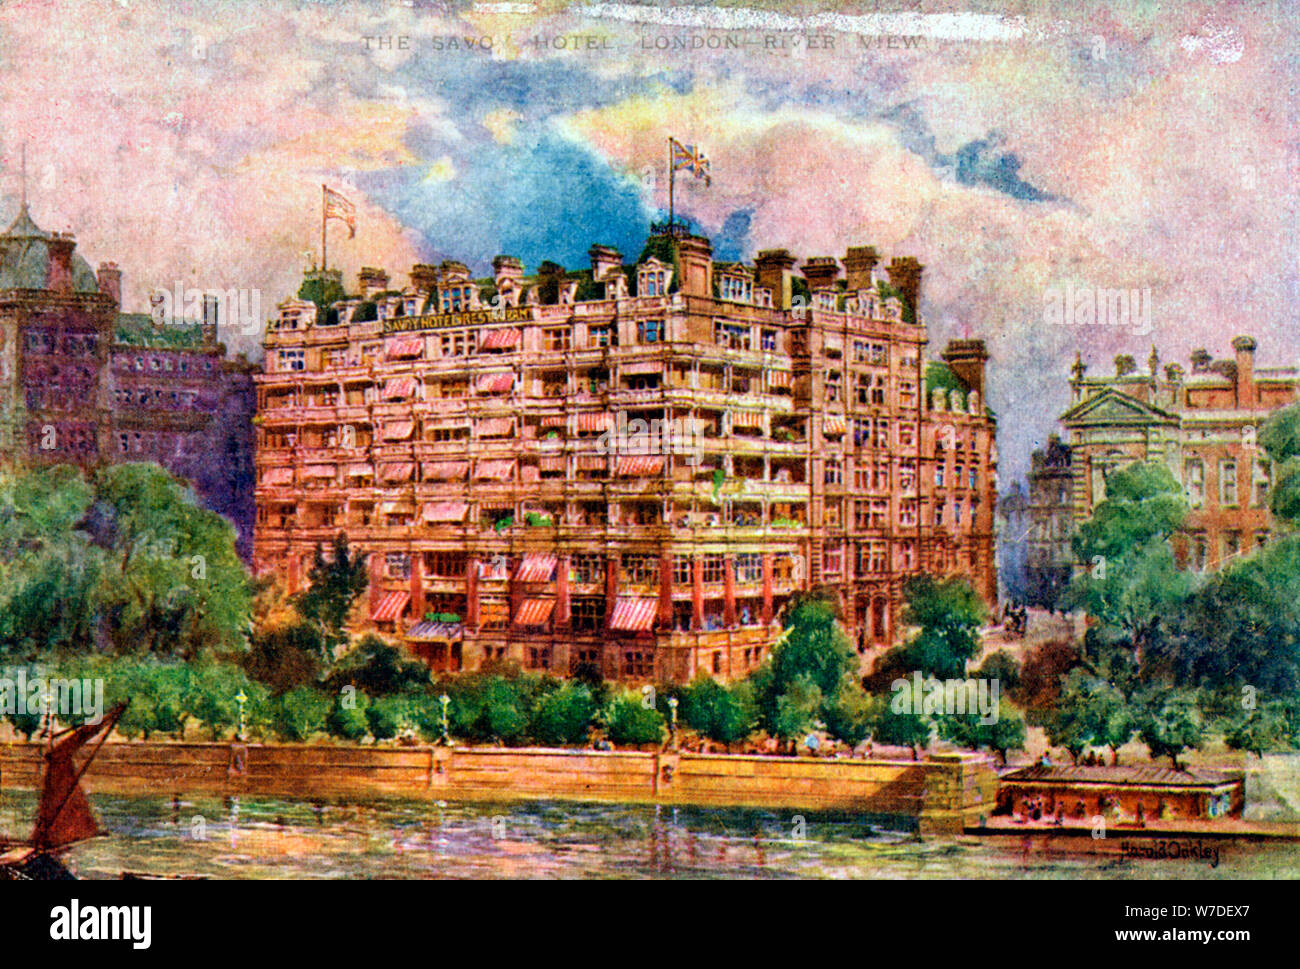 The Savoy Hotel as seen from the River Thames, London, 1905.Artist: William Harold Oakley Stock Photo